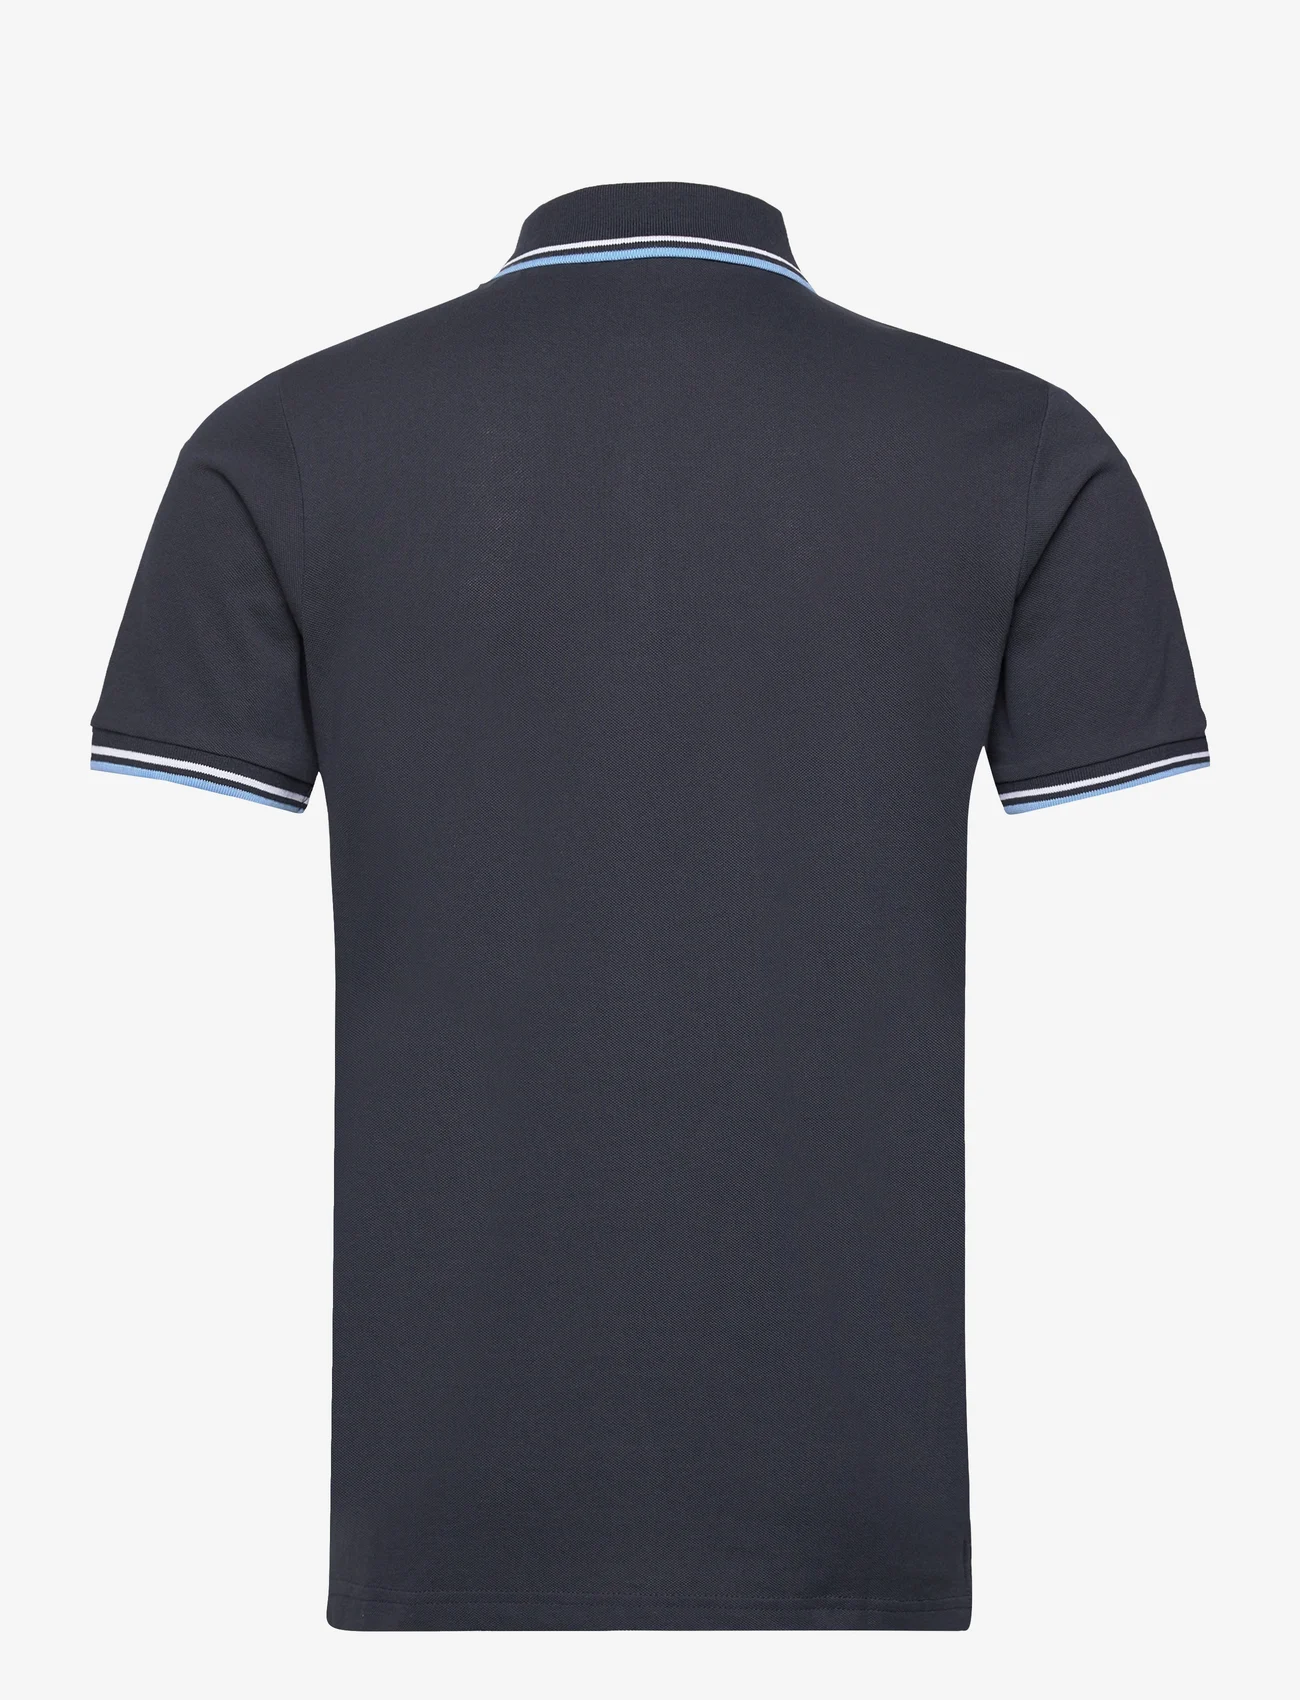 Lindbergh - Polo shirt with contrast piping - alhaisimmat hinnat - navy 124 - 1